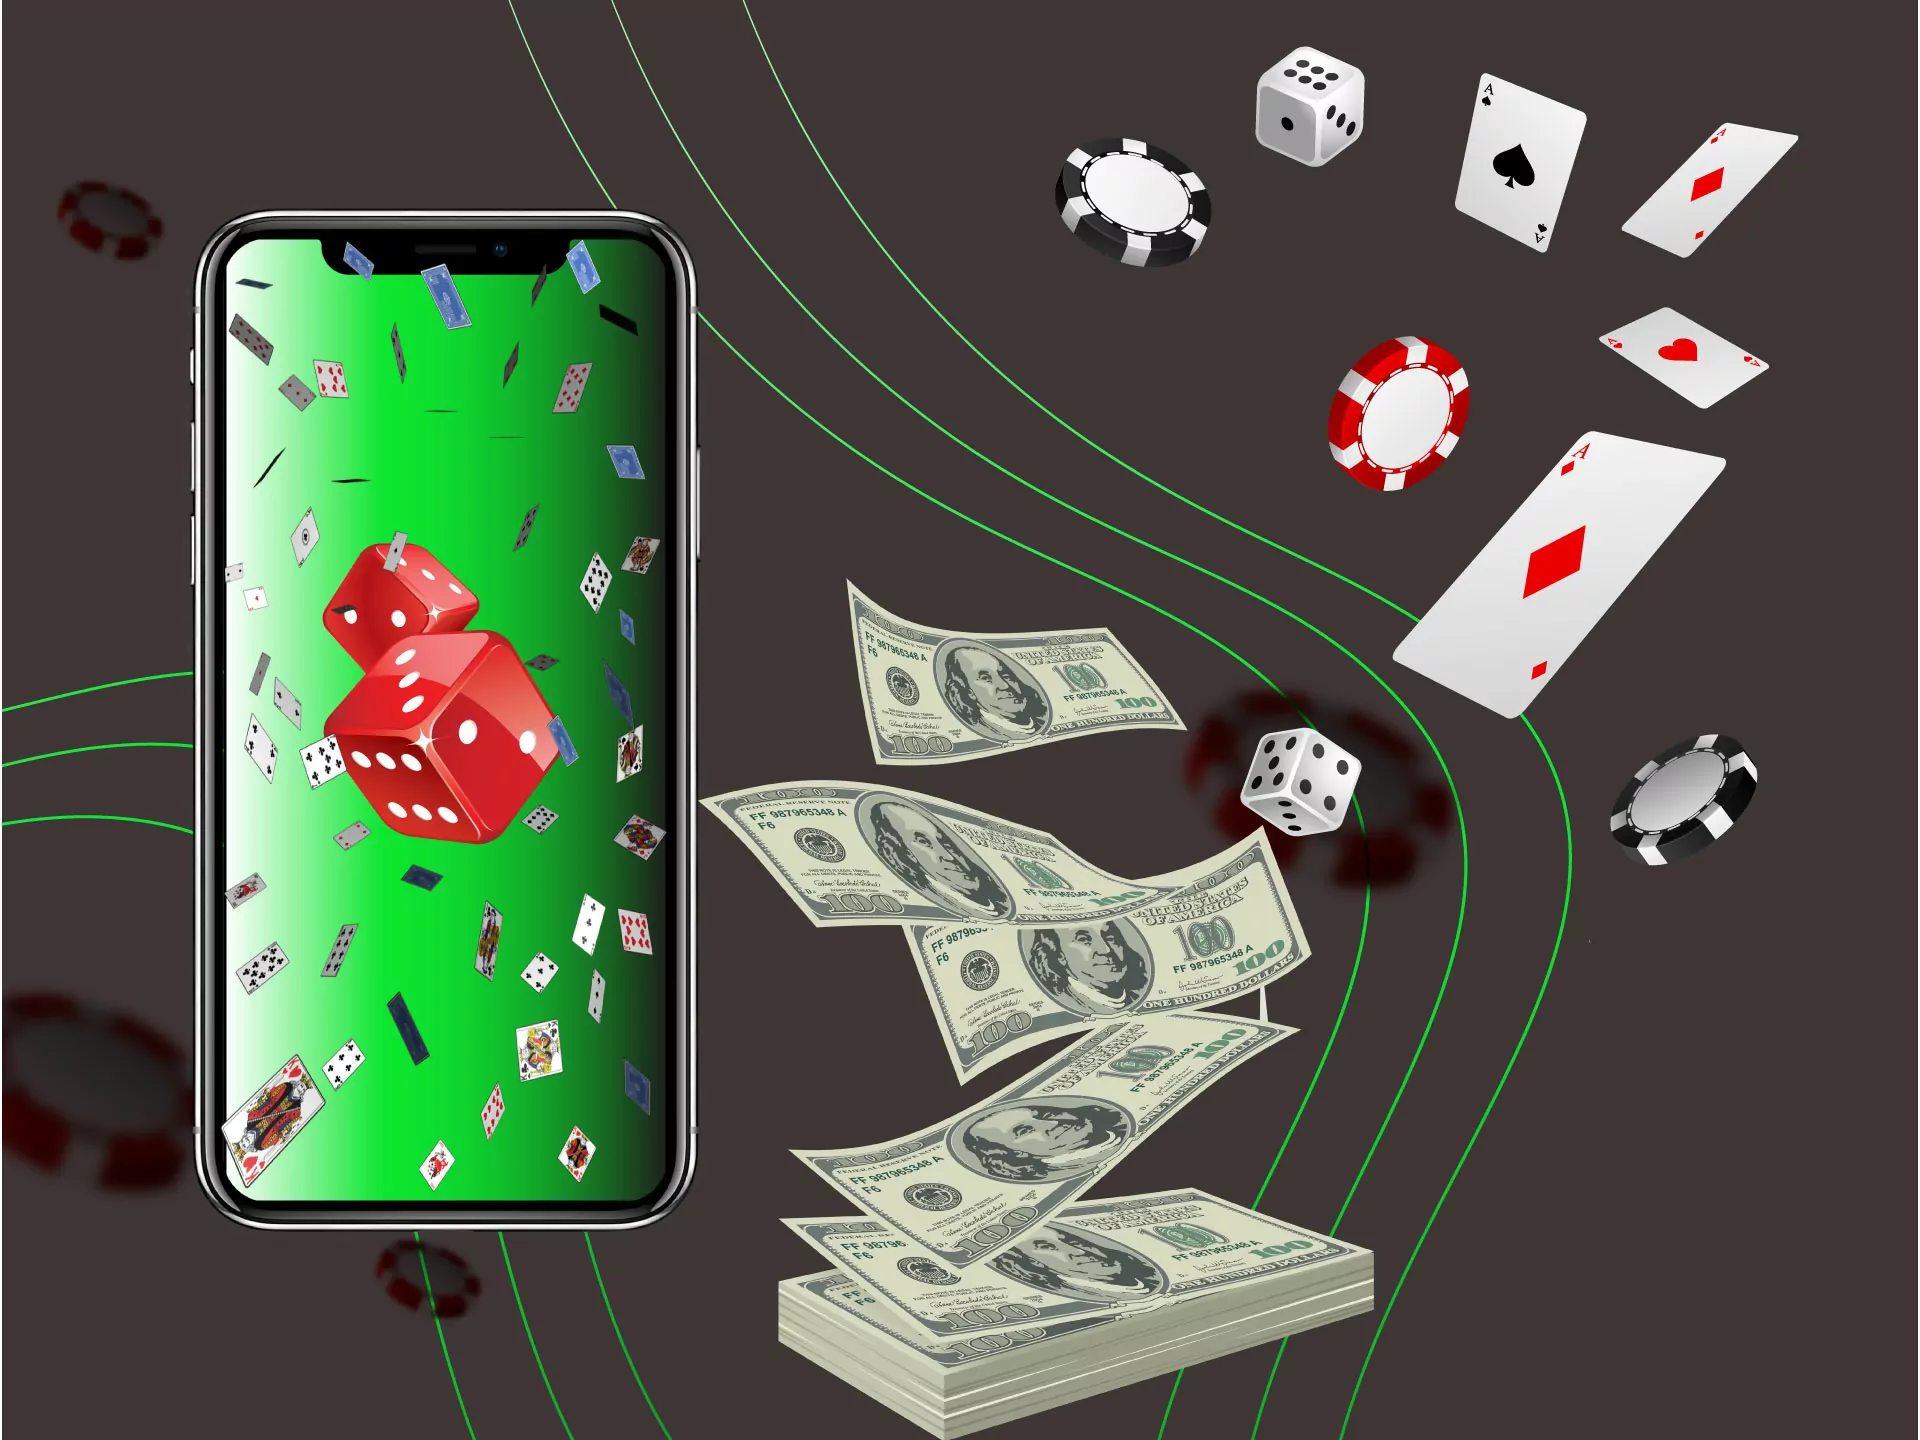 Verify your account in a poker room and withdraw your winnings.